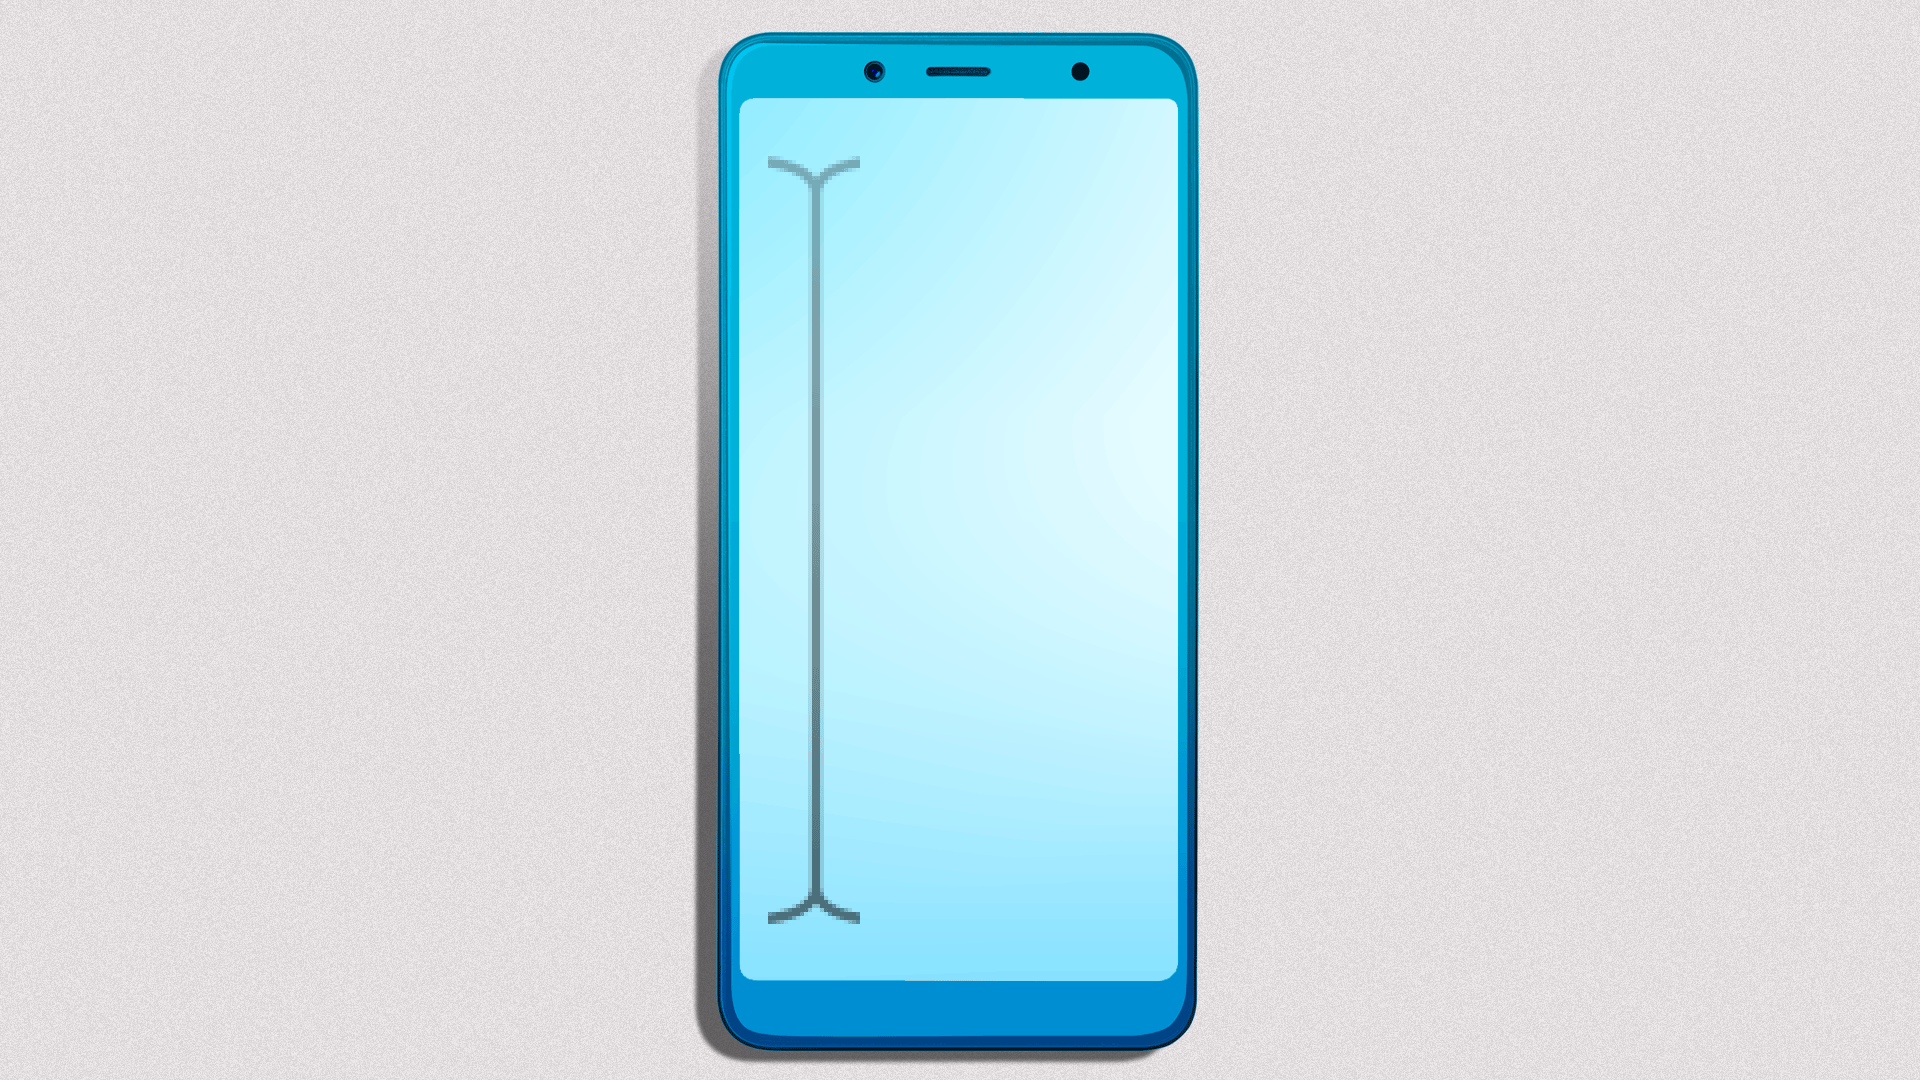 Illustration of a cellphone with a blinking cursor on the screen